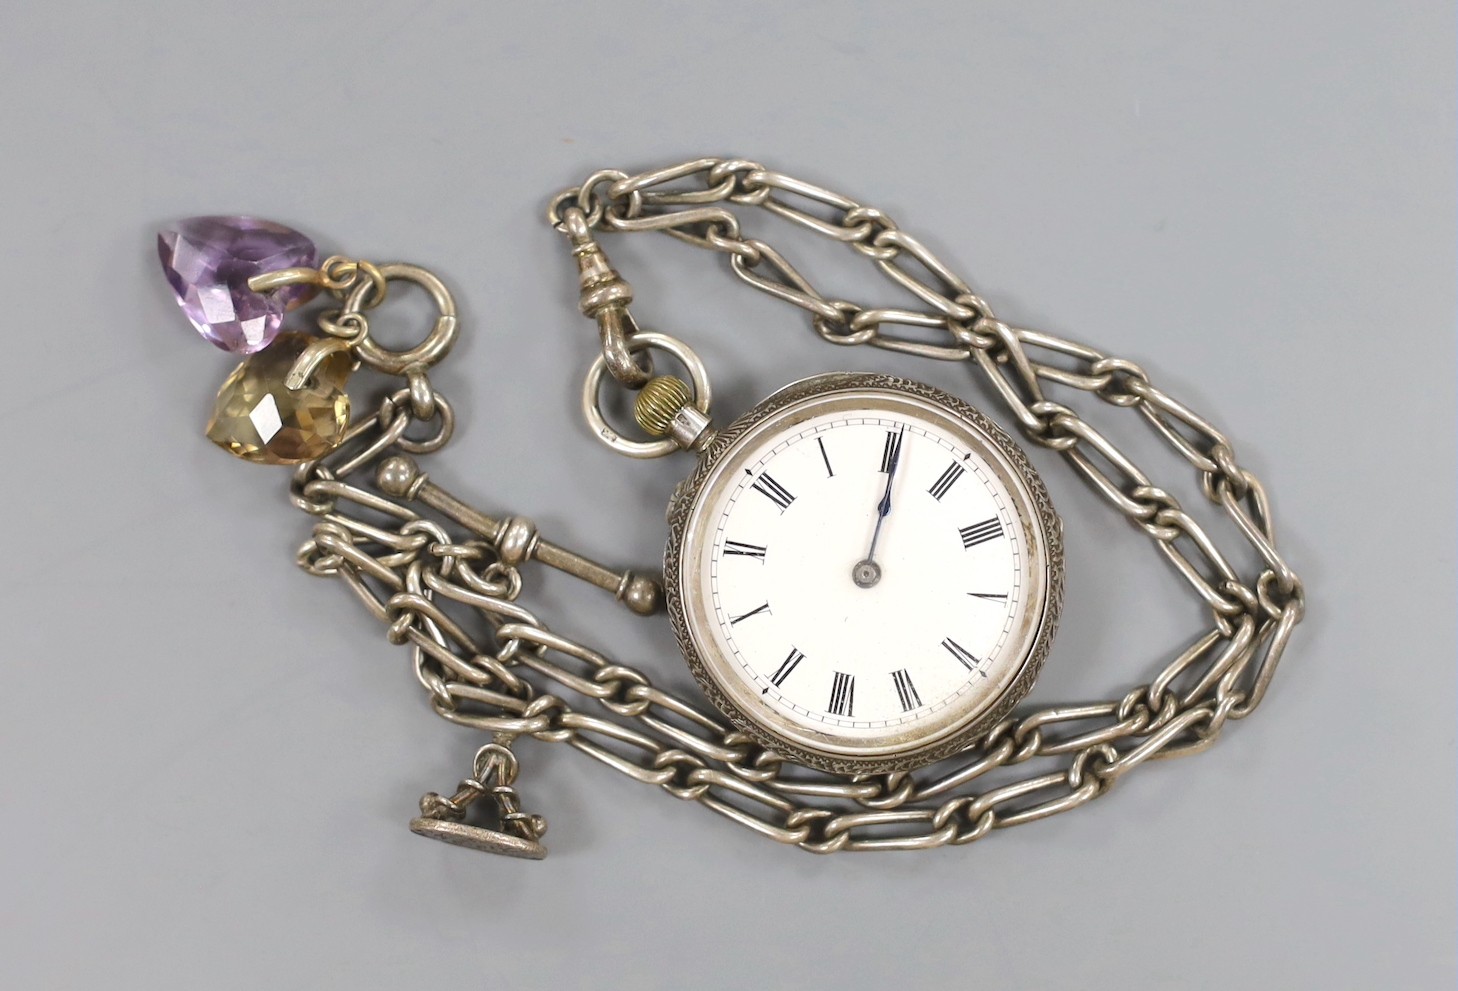 A lady's 9ct gold Omega manual wind wrist watch, a 935 white metal fob watch with albert and a silver open faced pocket watch.